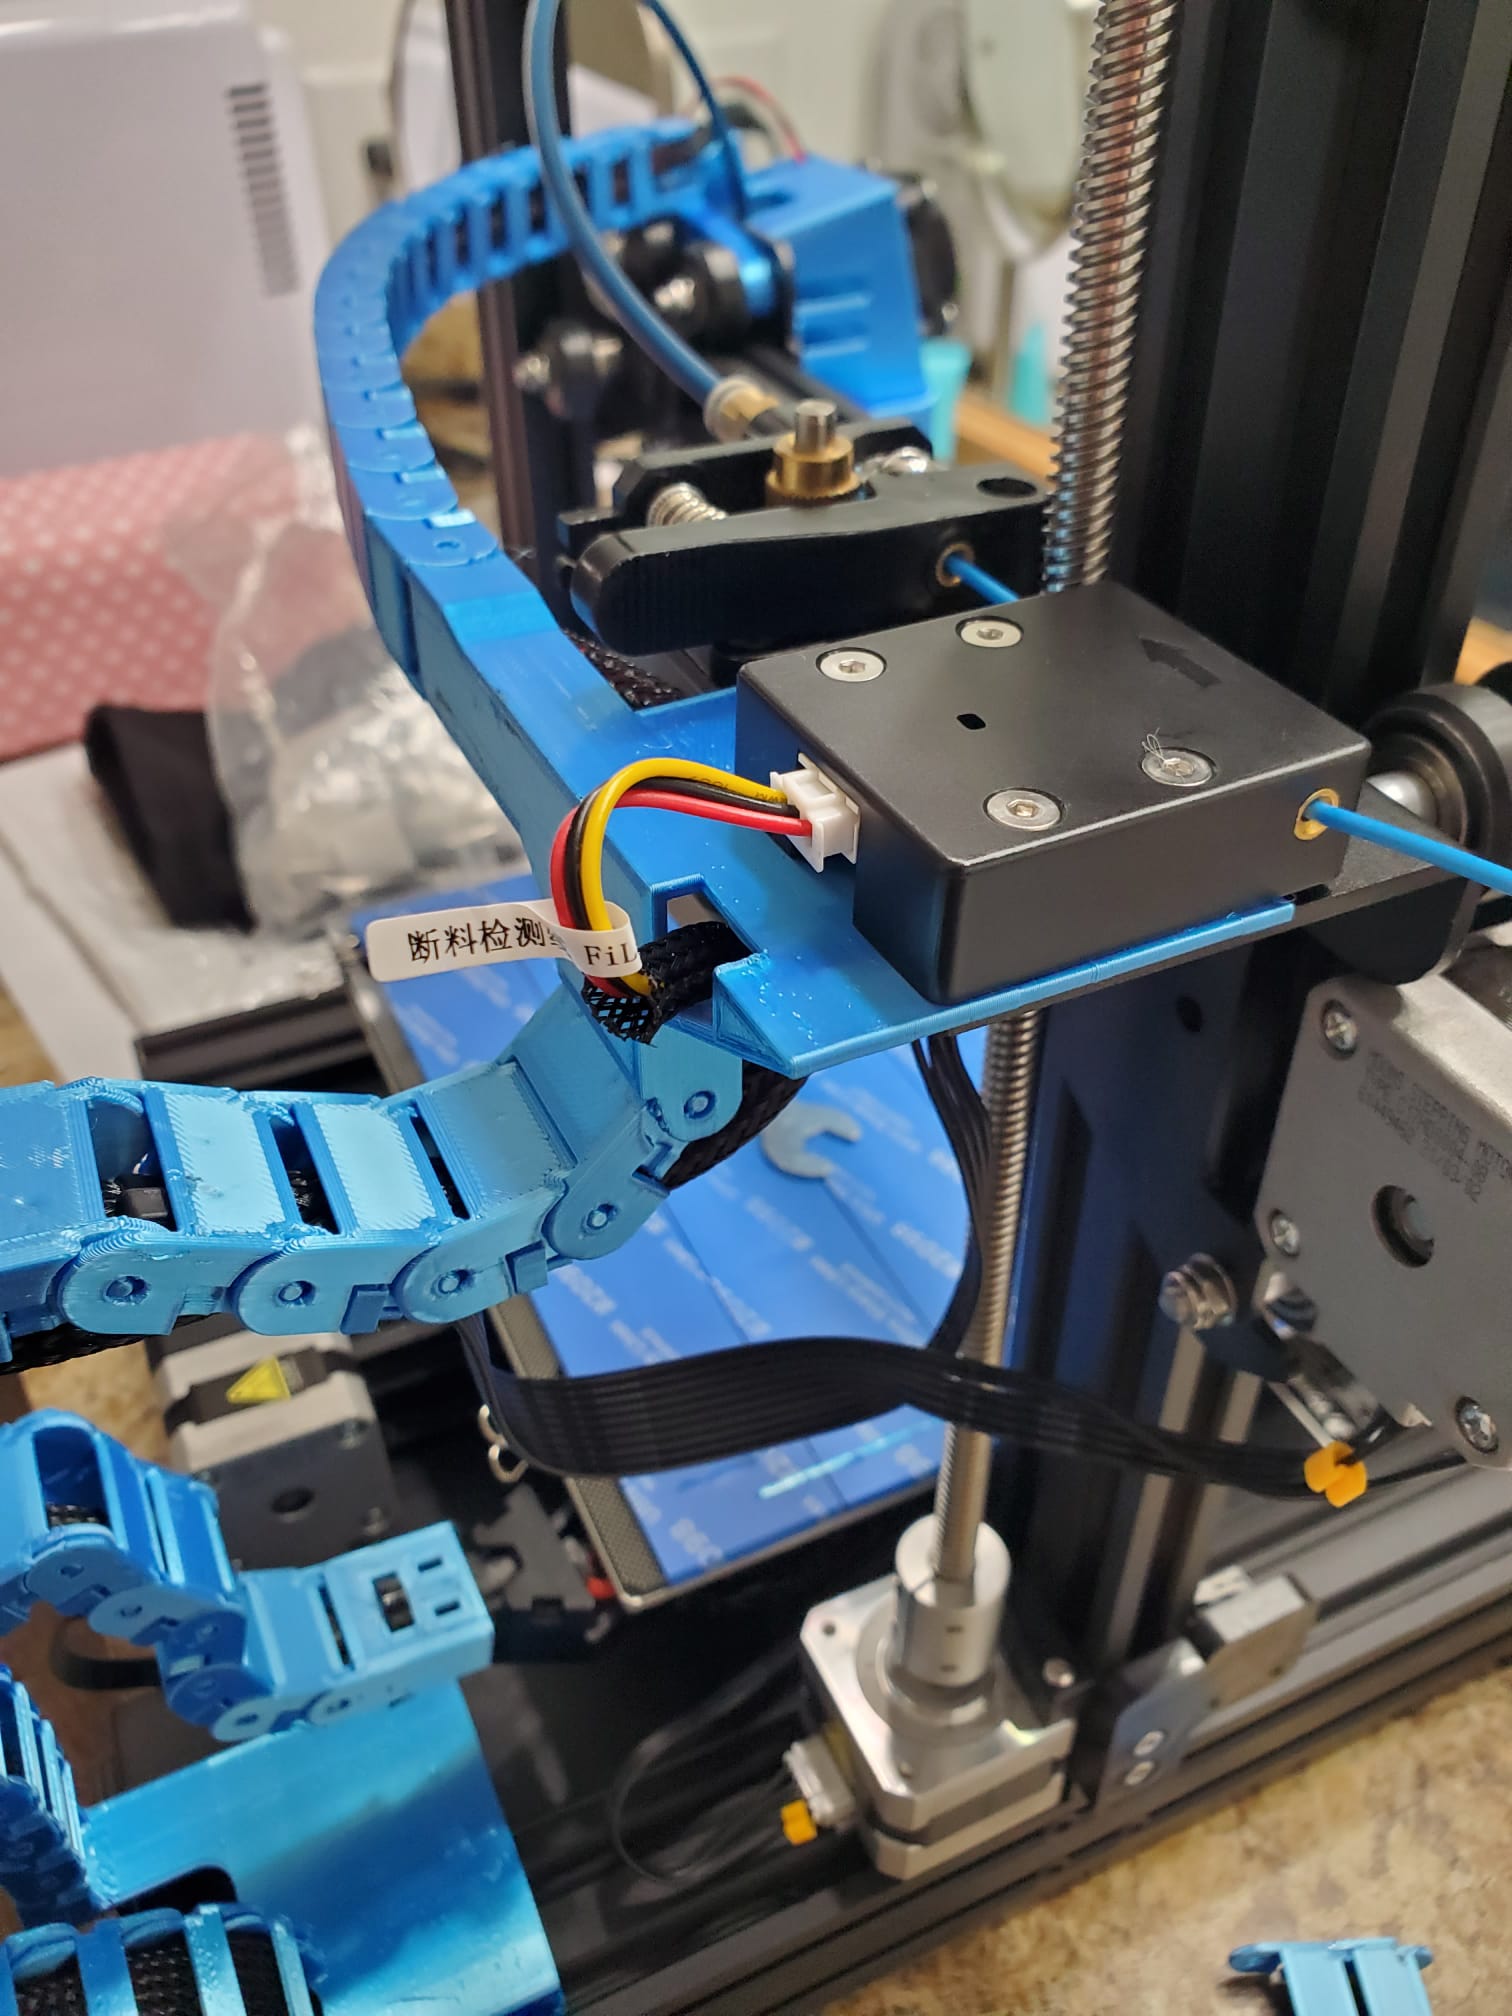 Ender 3v2/Aquila Cable Chain Extruder Mount with Filament Runout